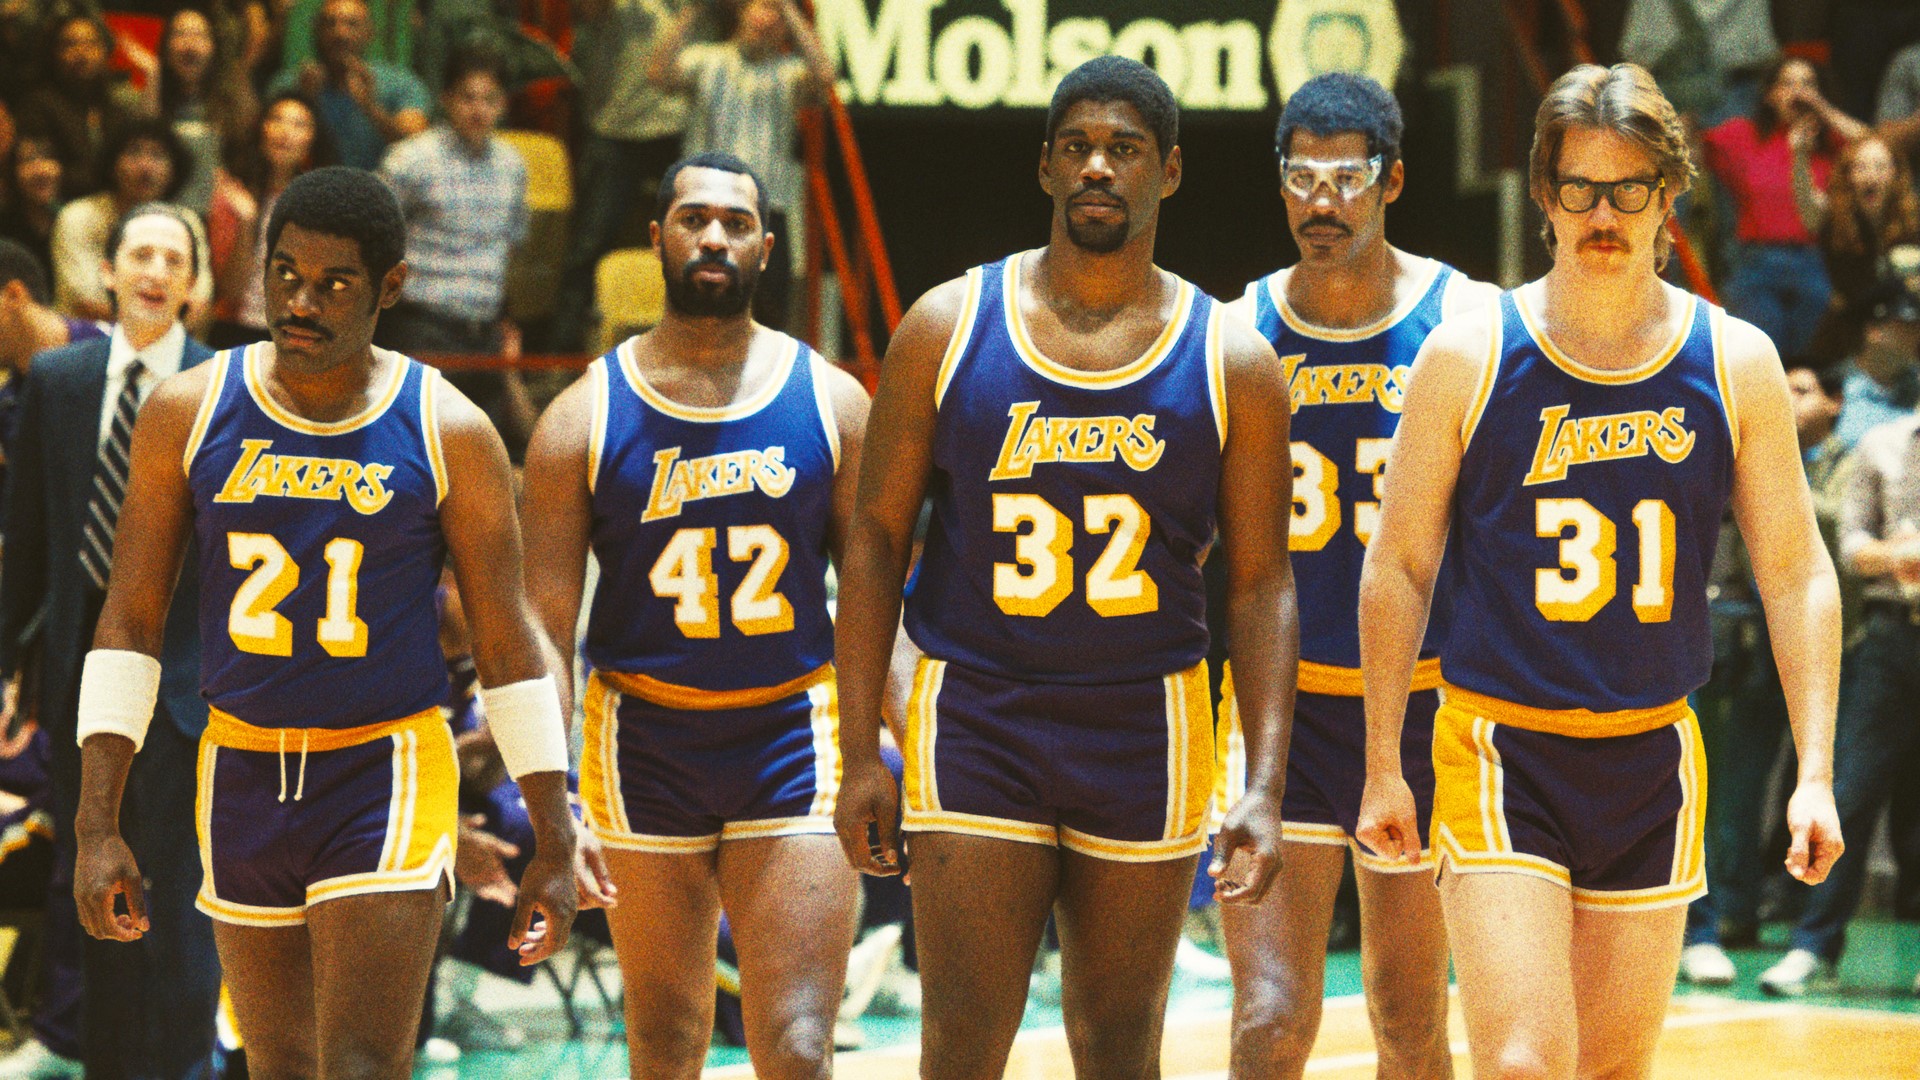 See How The Cast of 'Winning Time: The Rise of The Lakers Dynasty